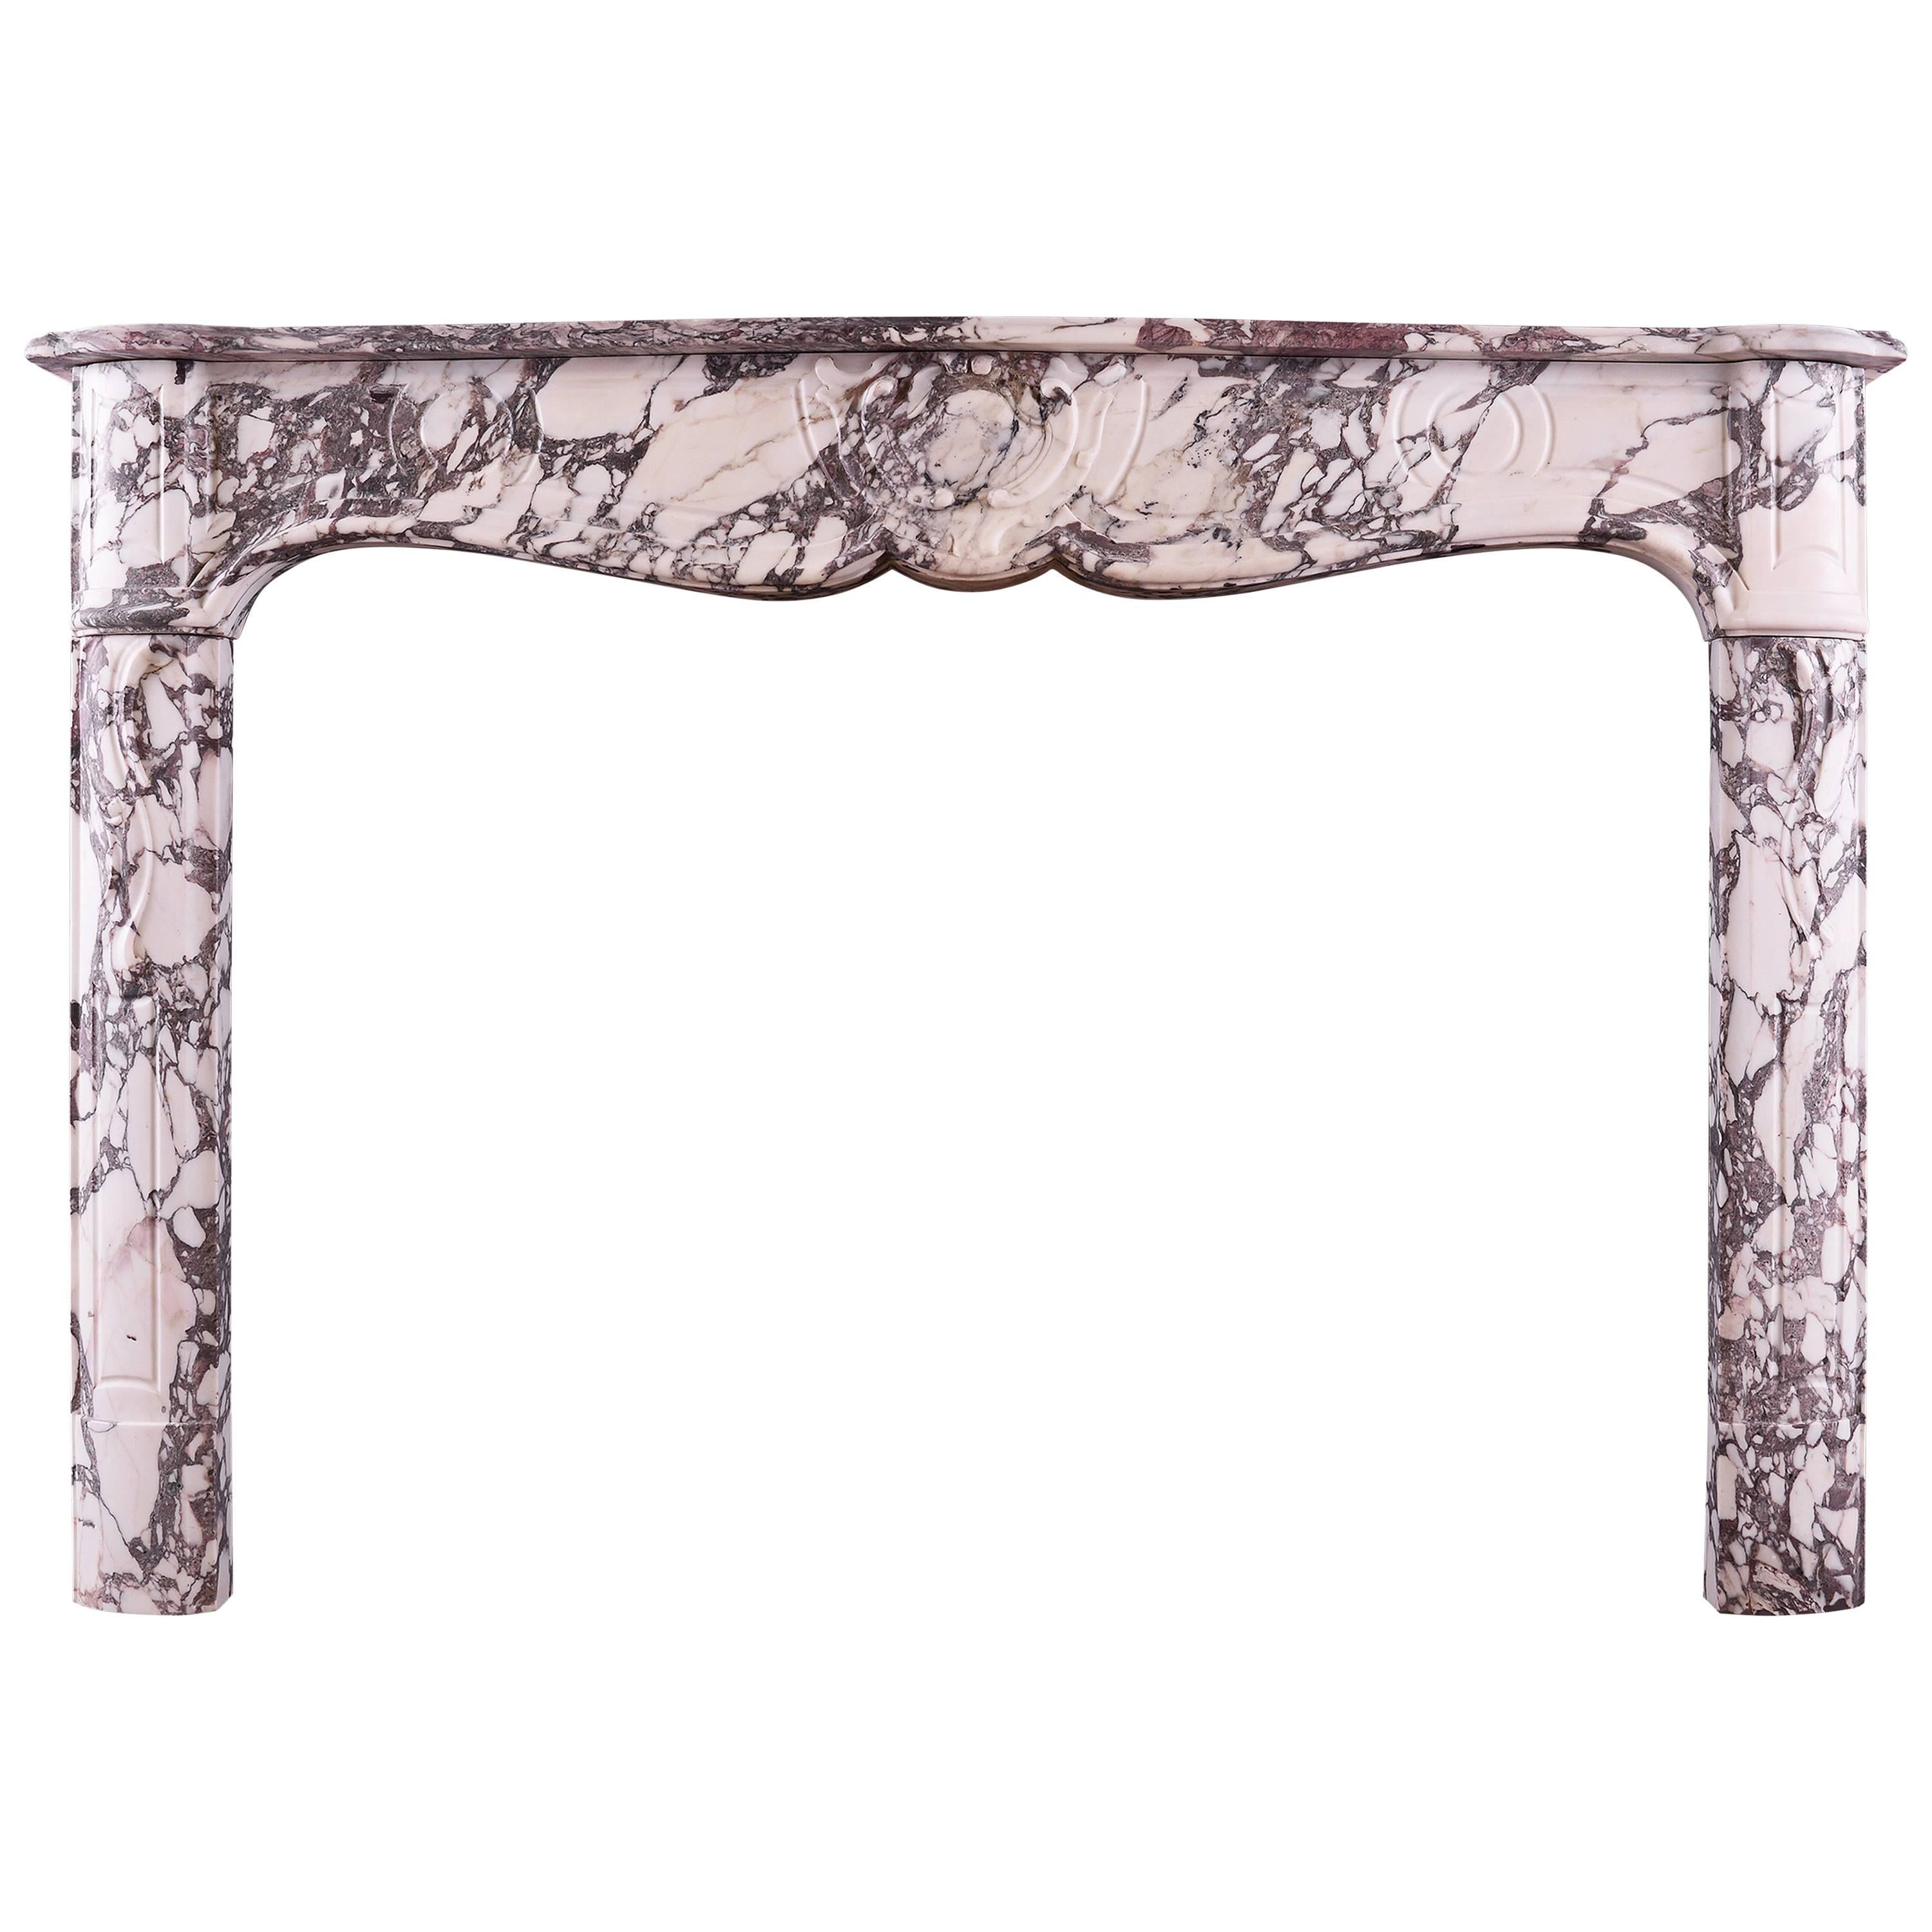 French Provencale Fireplace in Breche Violette Marble